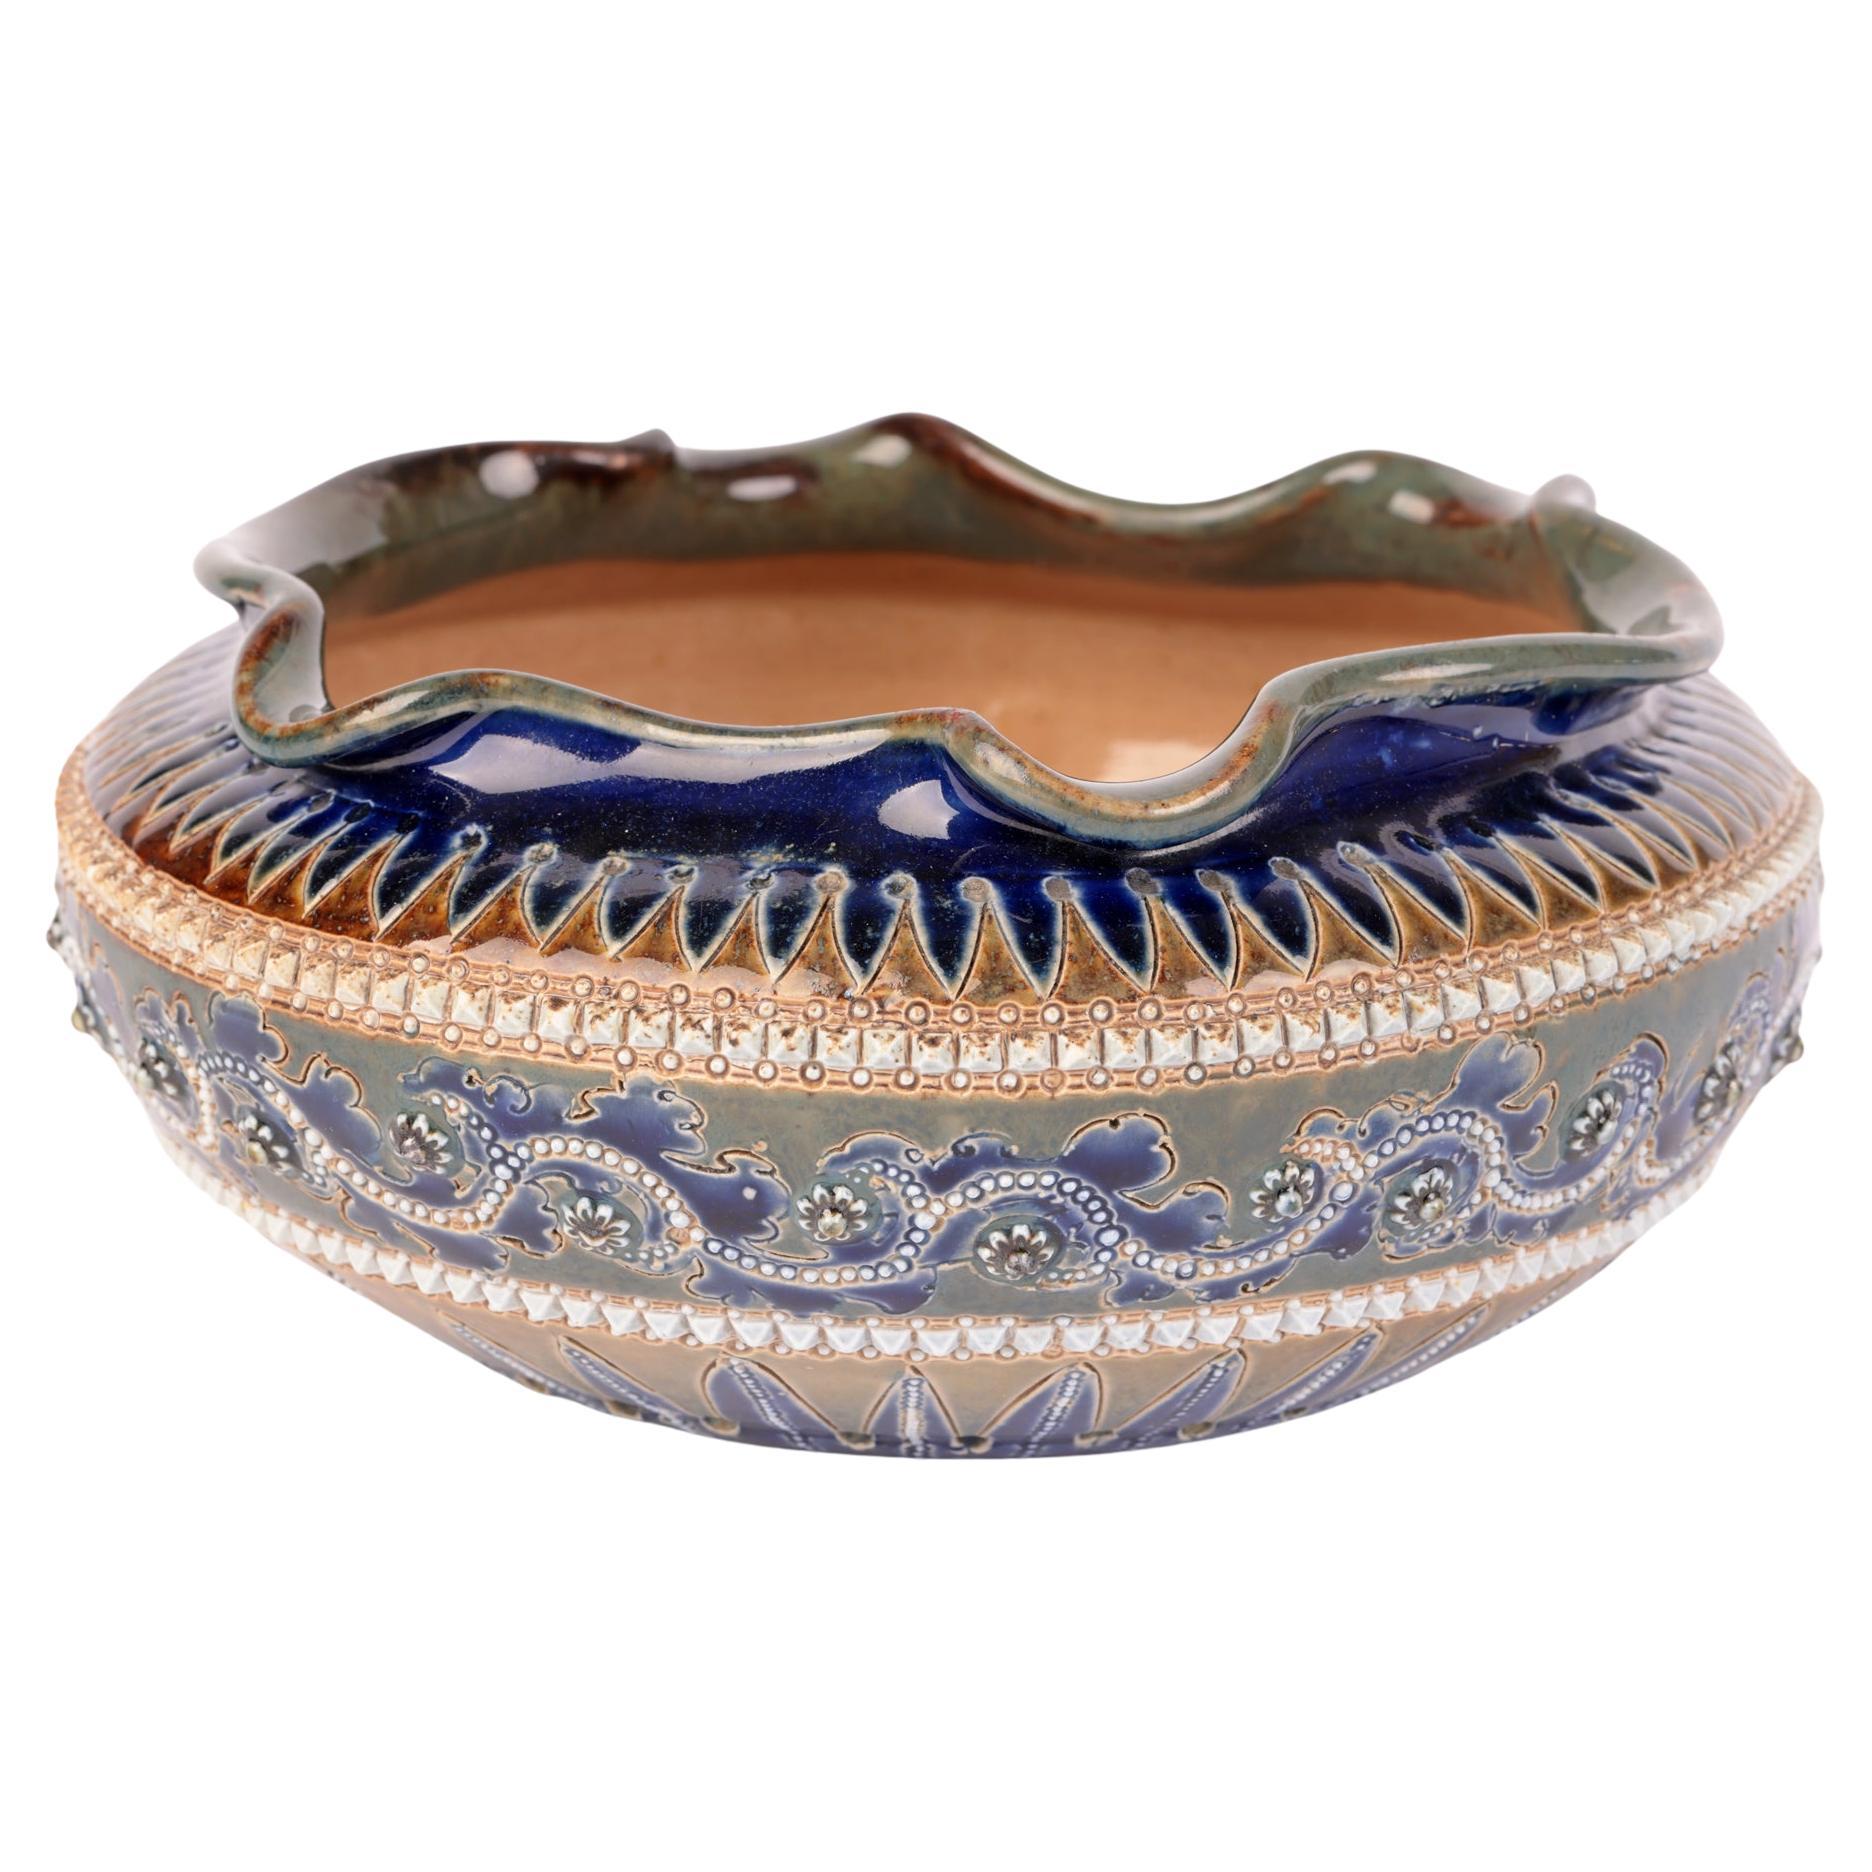 George Tinworth Doulton Lambeth Aesthetic Movement Pottery Bowl, 1879 For Sale